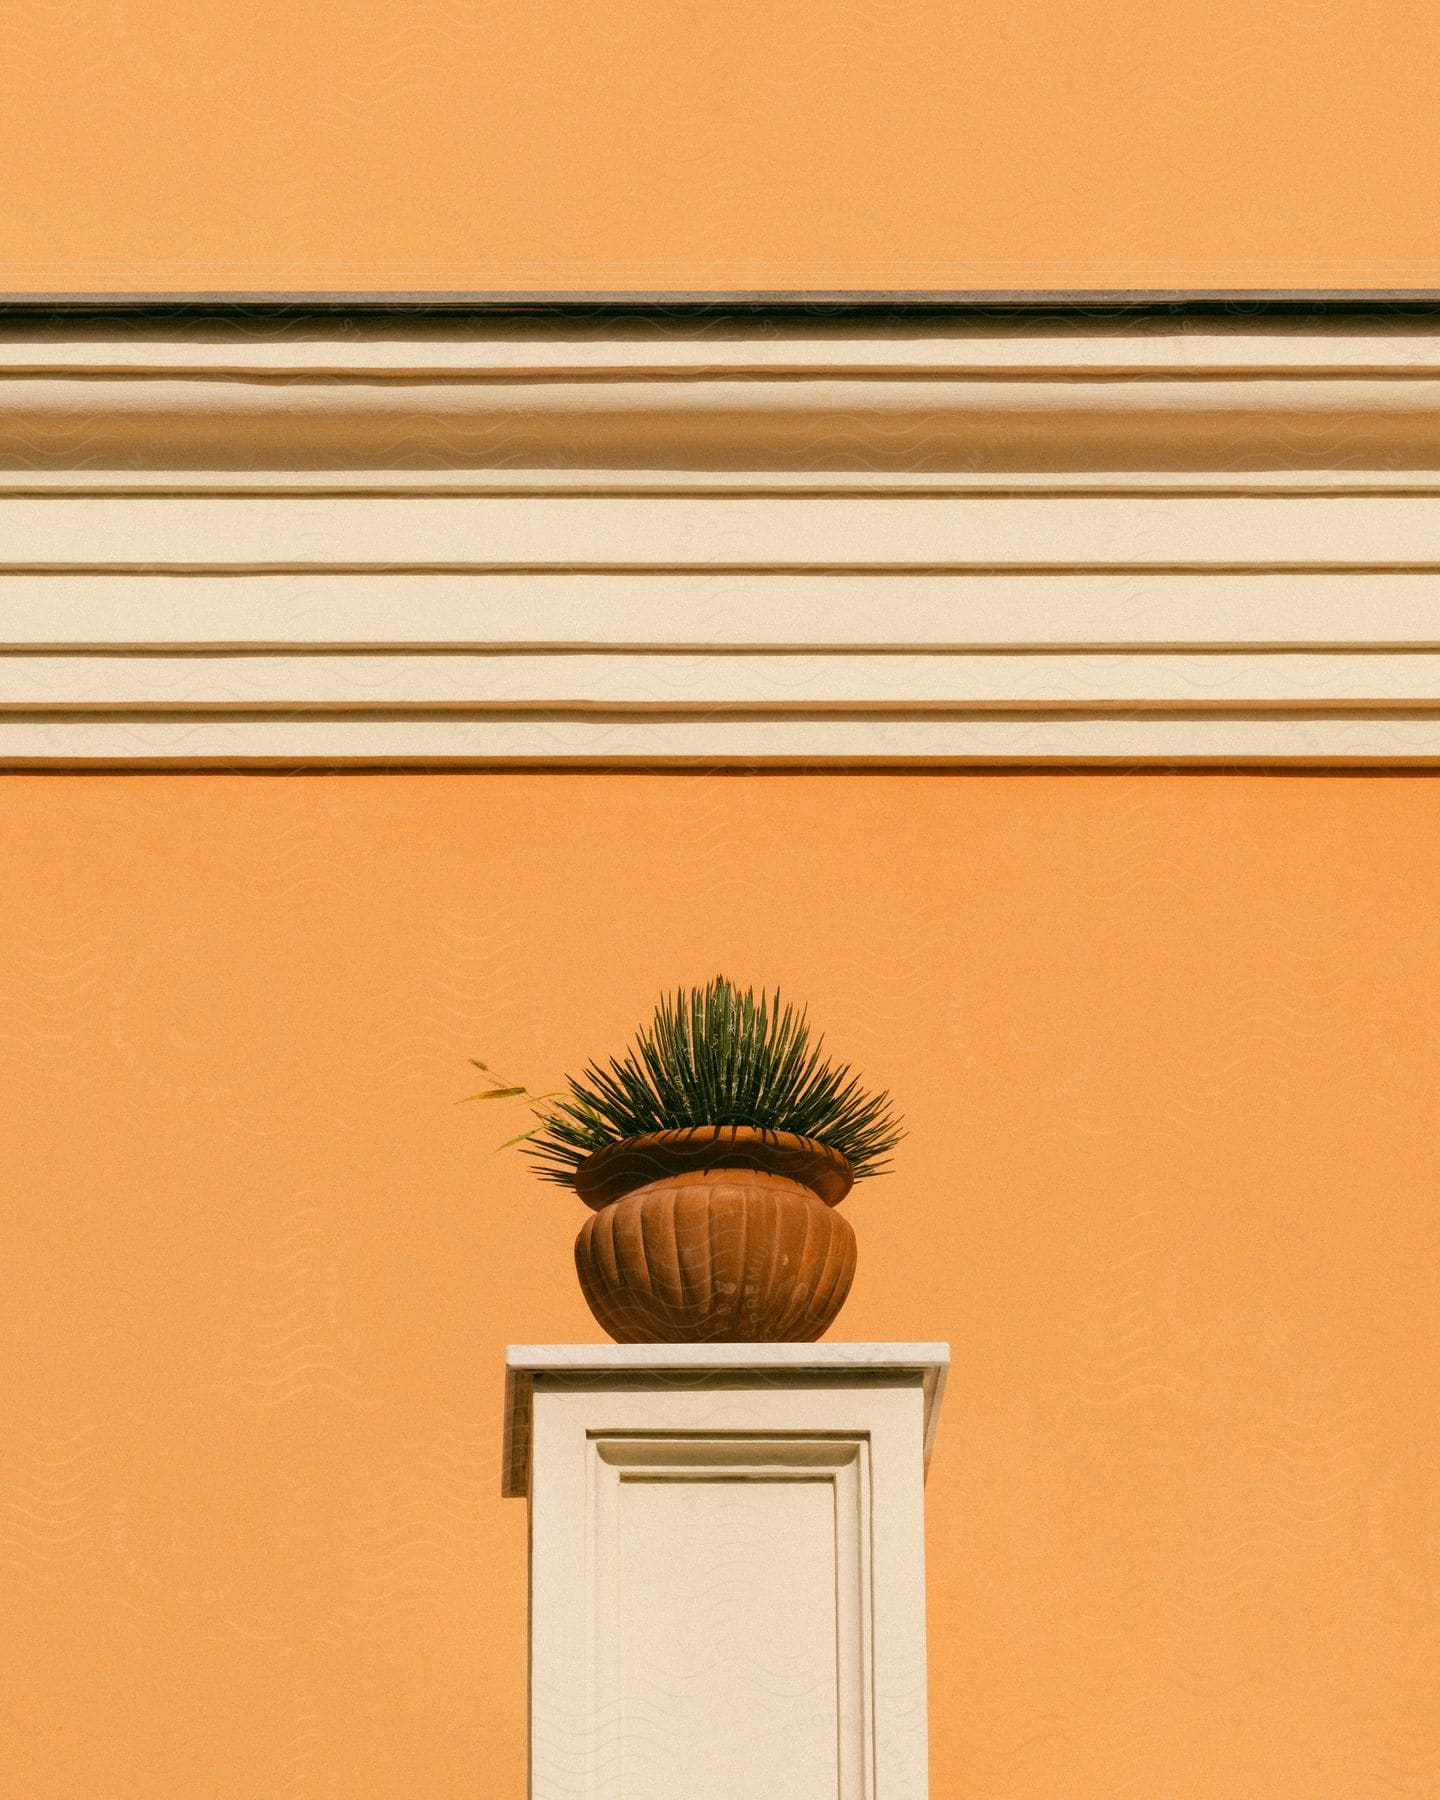 Plant perched in a brown clay pot on a white pedestal against an orange wall.